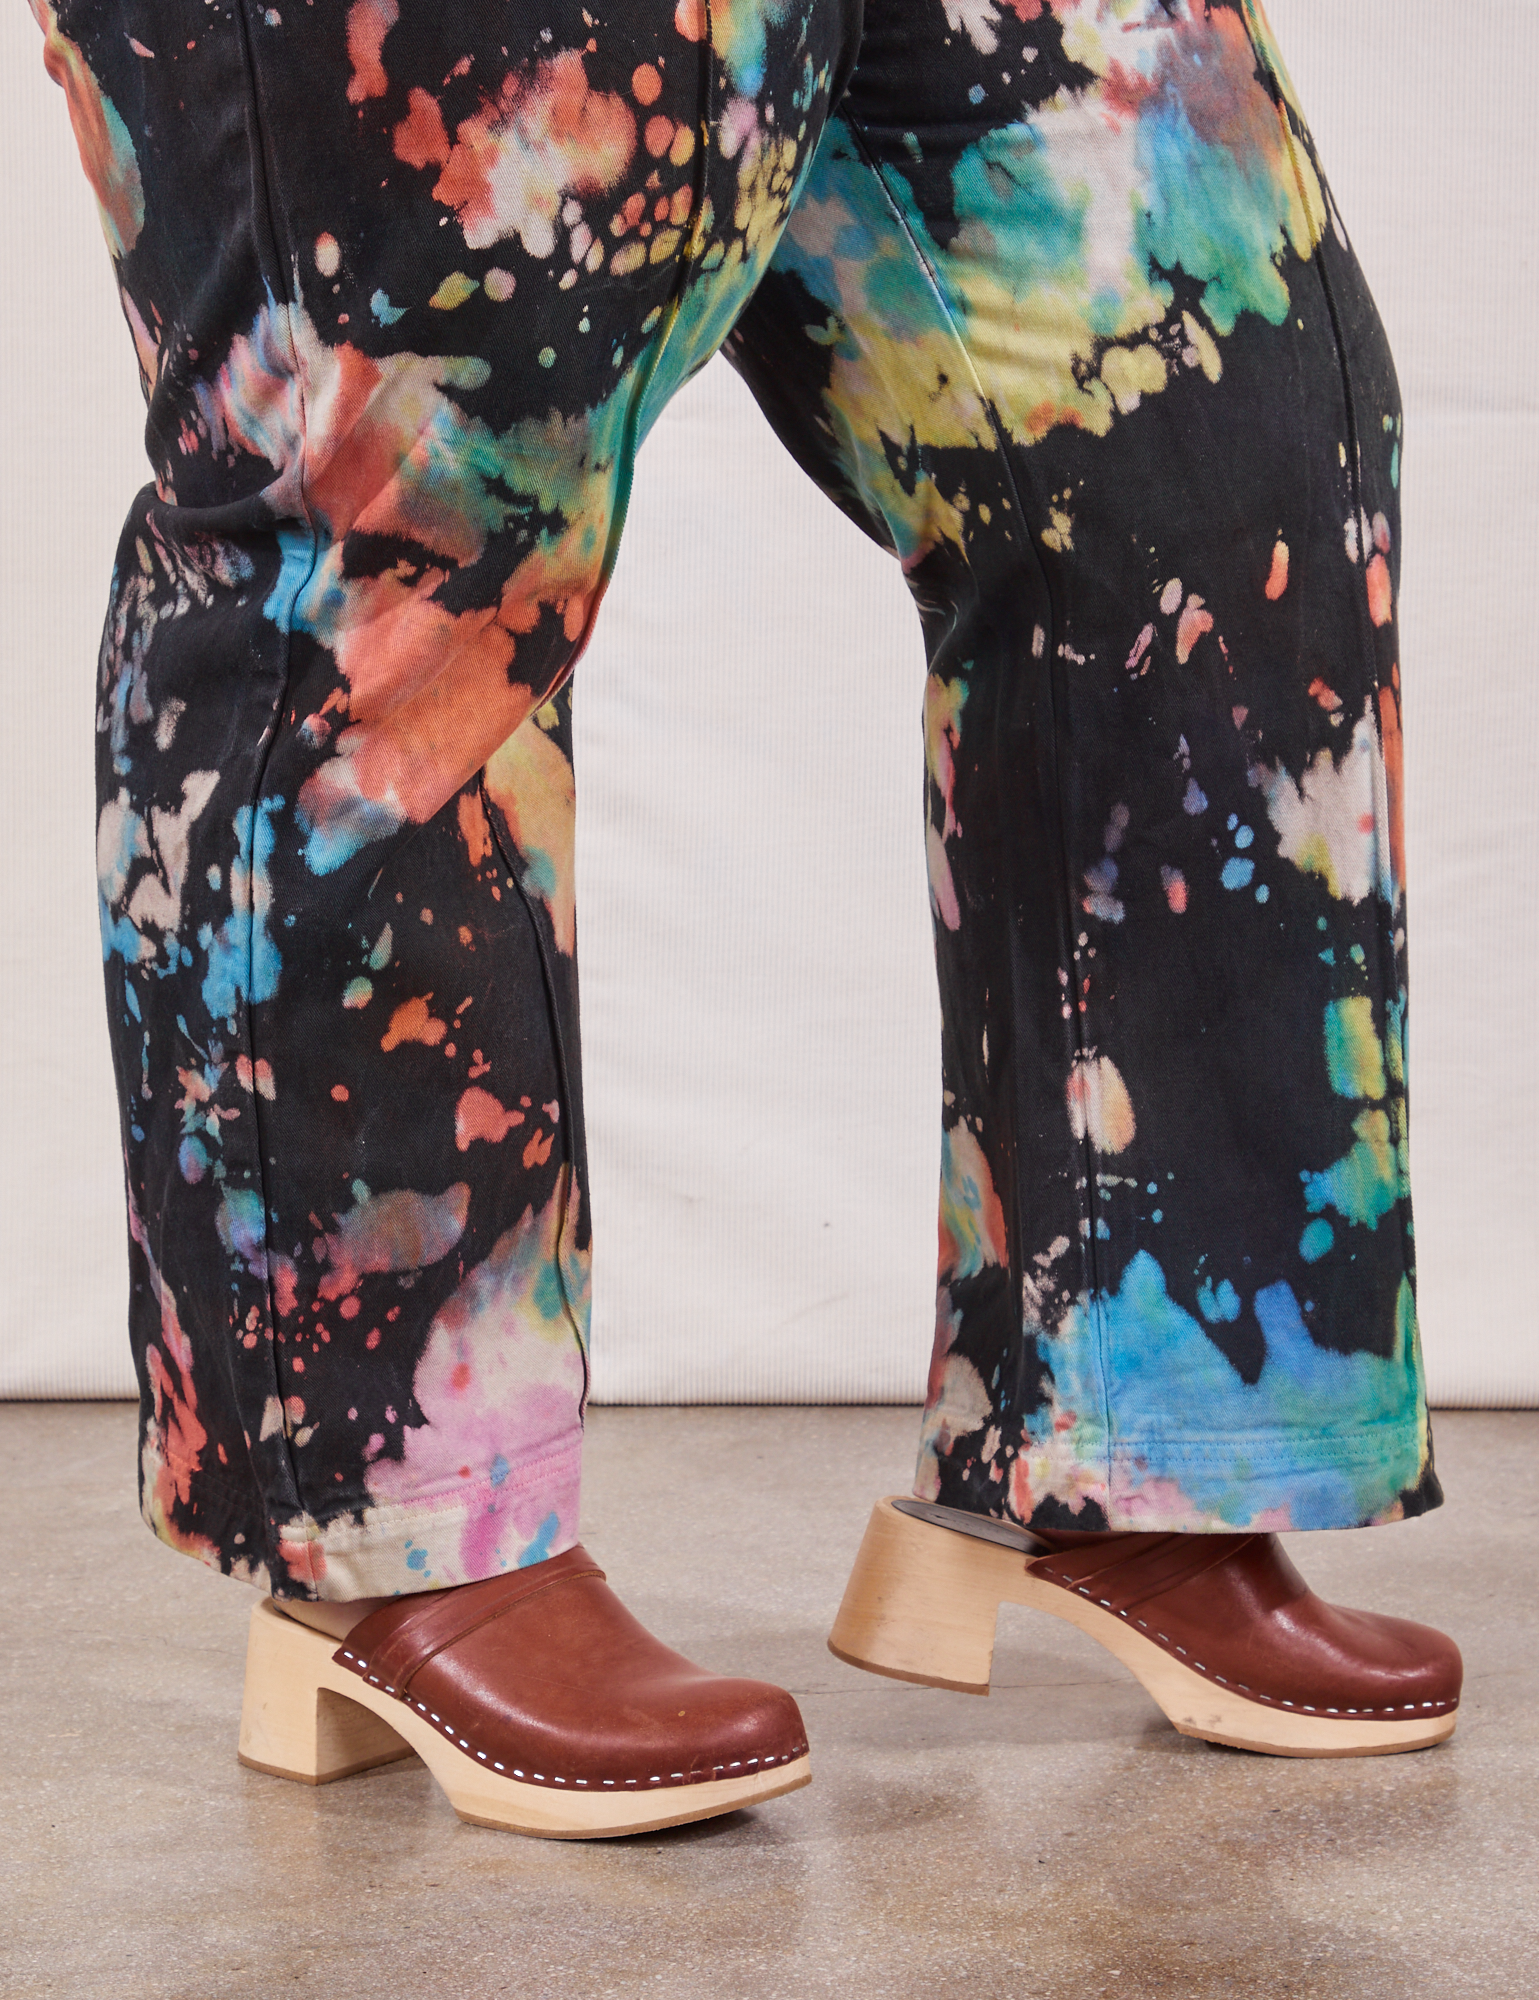 Western Pants in Rainbow Magic Waters side view pant leg close up on Ashley